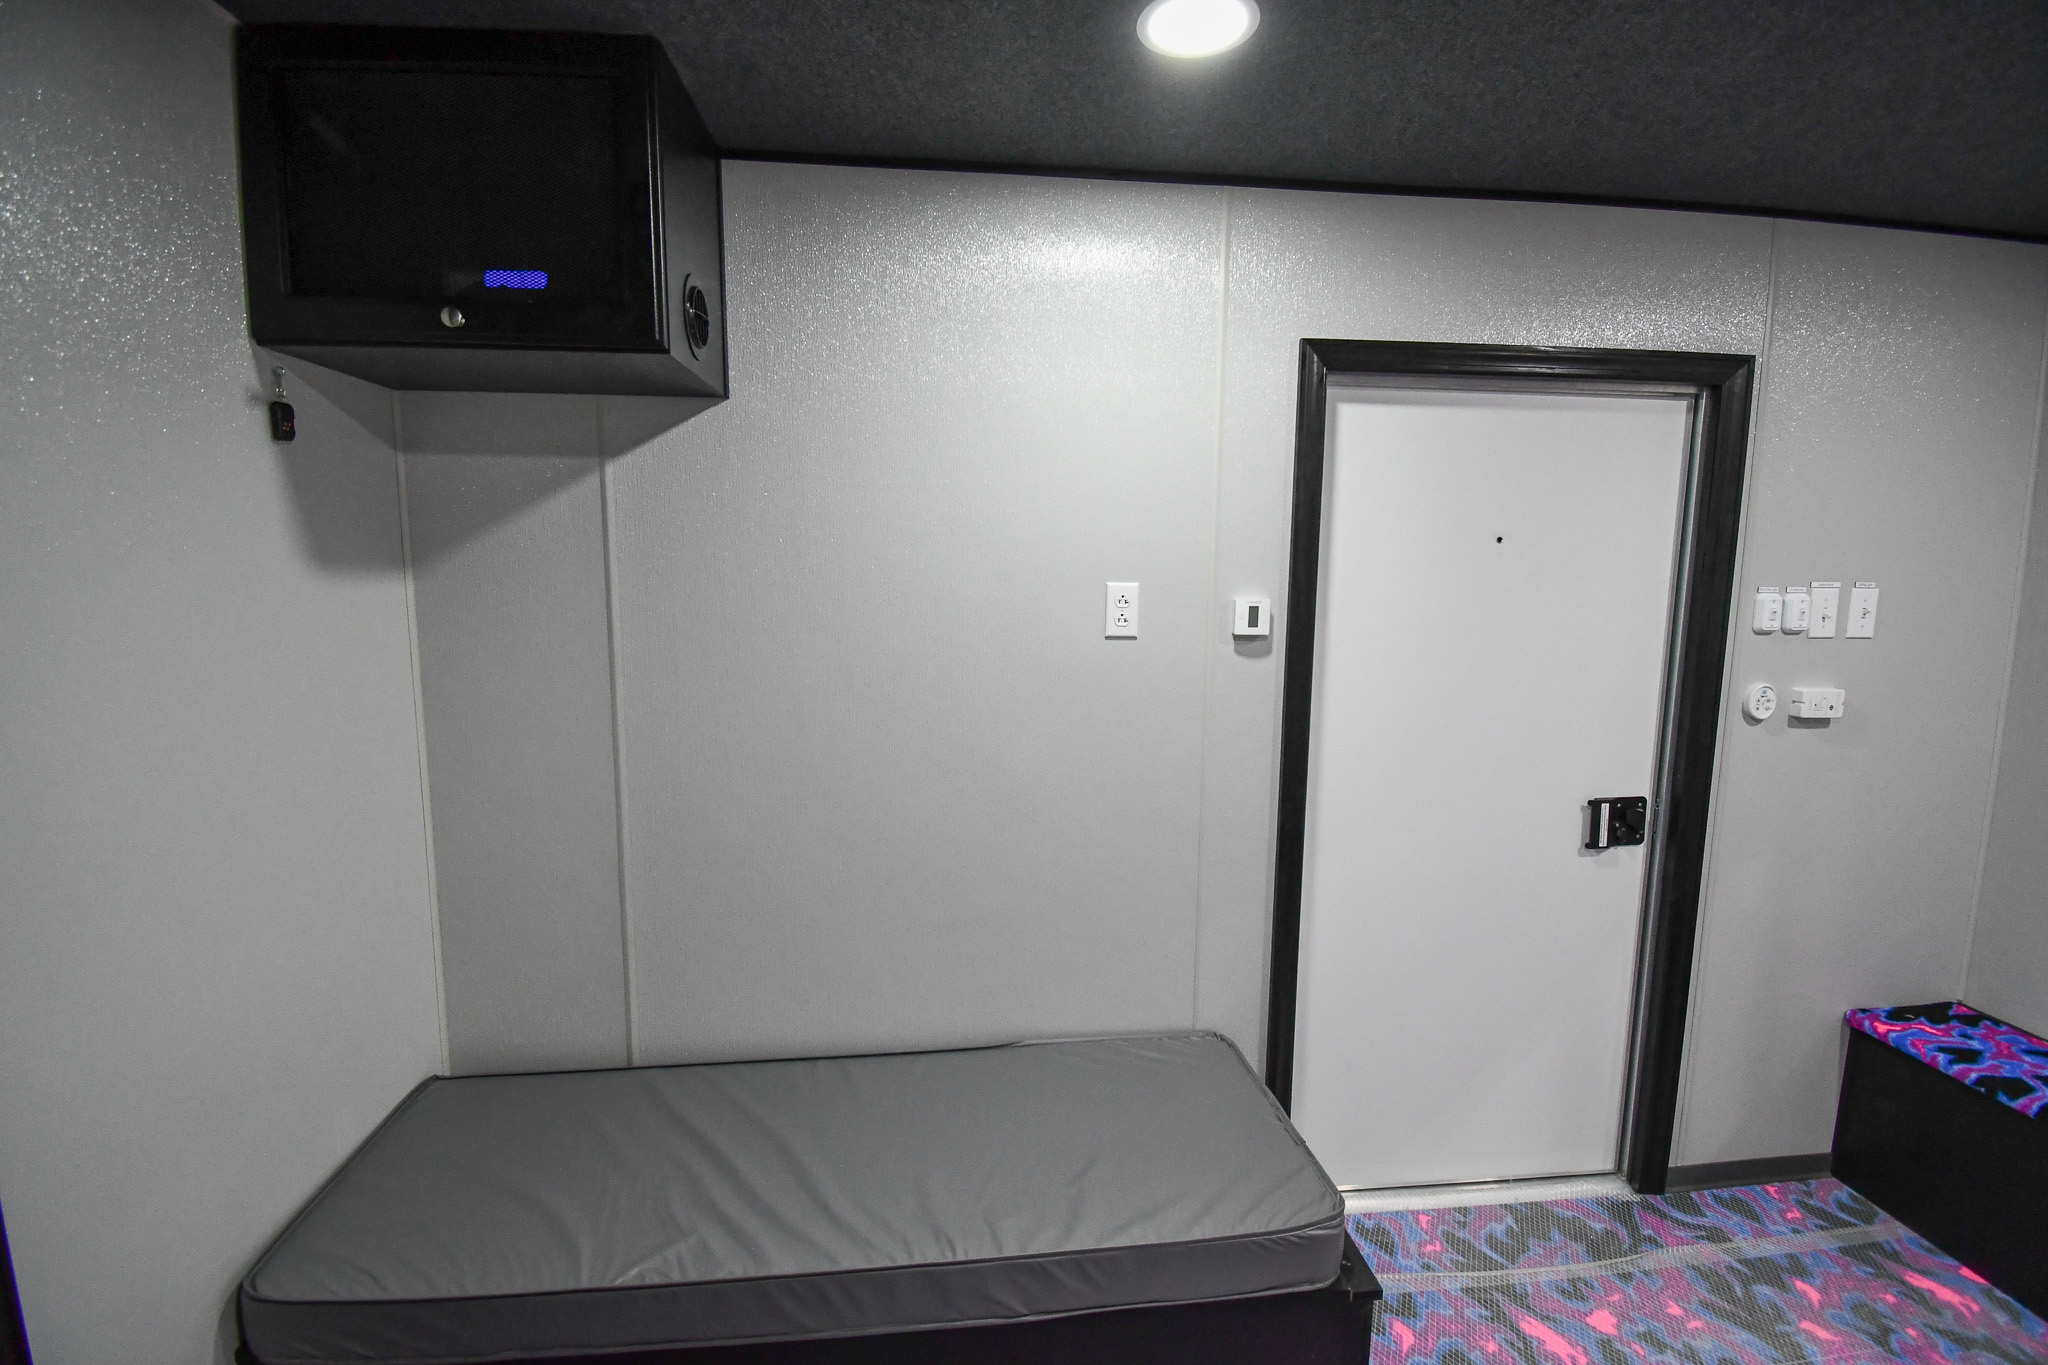 A view of the bedroom stage and a smoke machine inside the unit for Merrillville, IN.